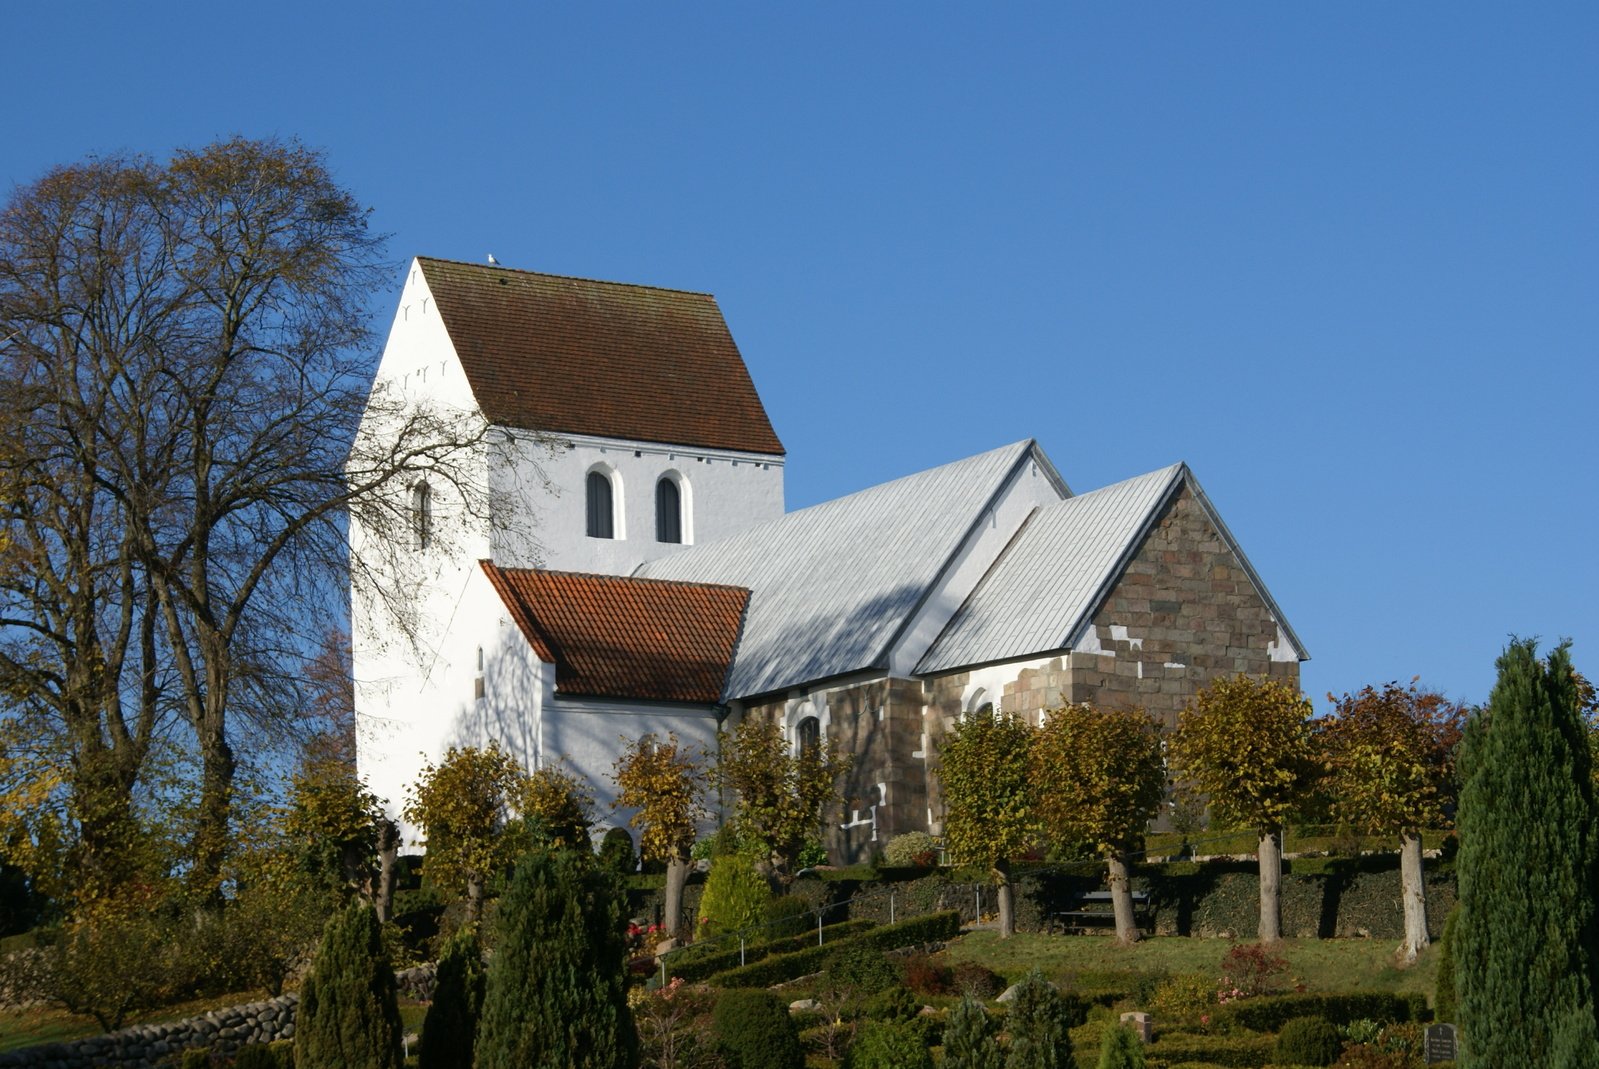 the church sits on a hill overlooking trees